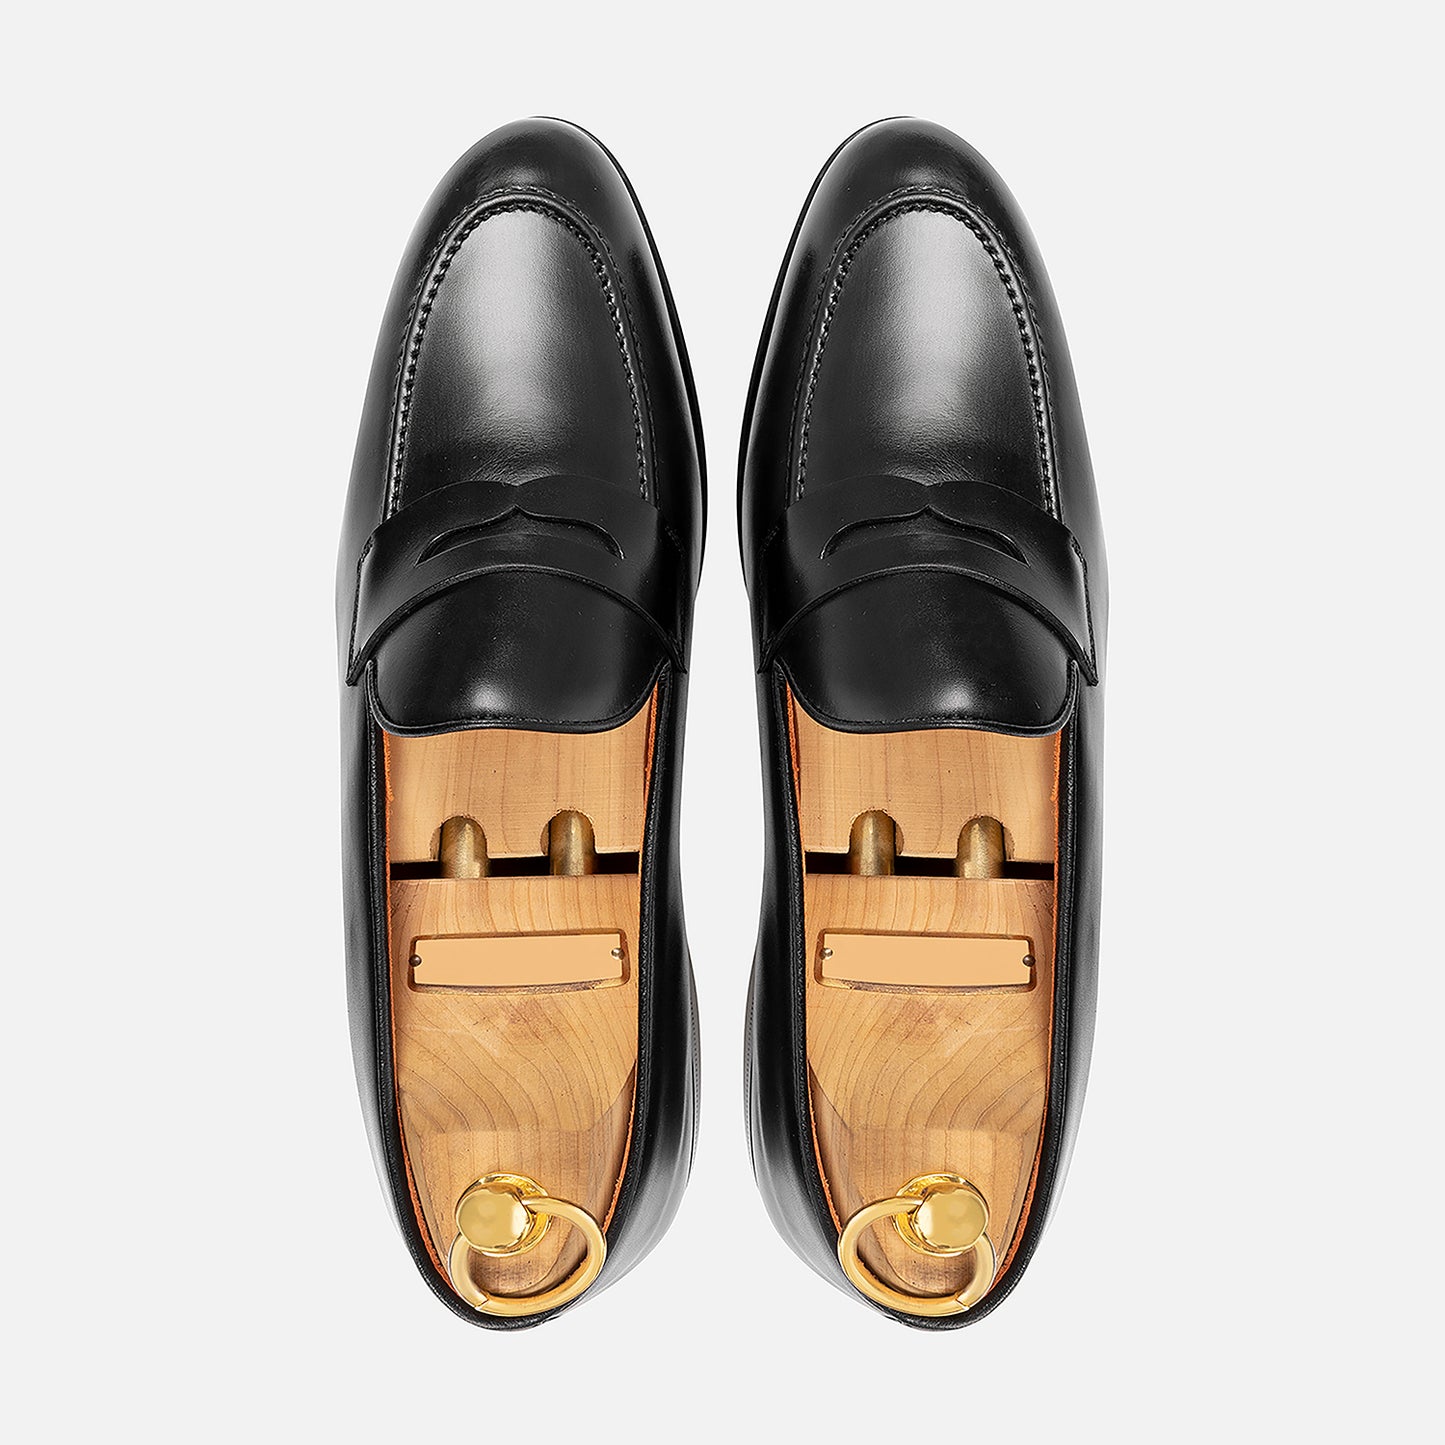 Loafers in black